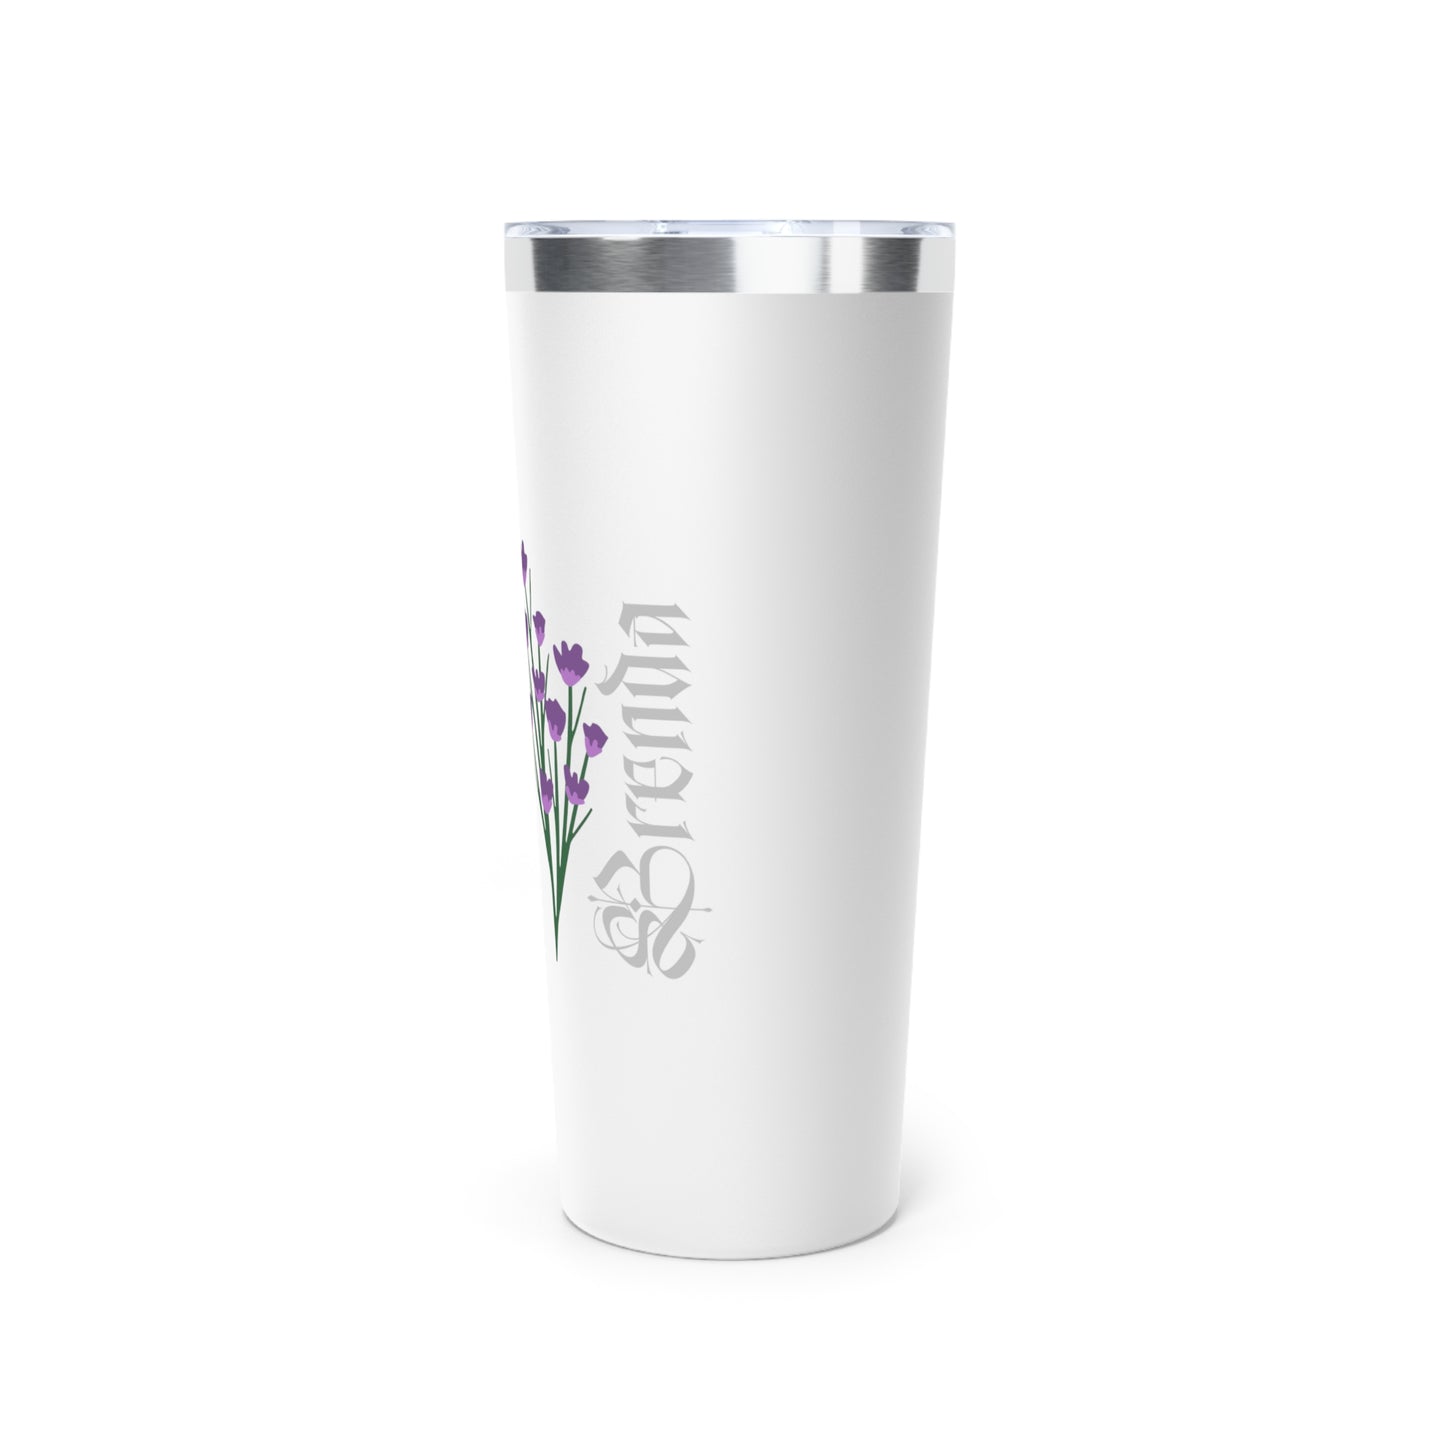 February Personalized Birth Flower Tumbler, Personalized Birth Flower Coffee Cup With Name, Gifts for Her, Bridesmaid Proposal, Party Favor